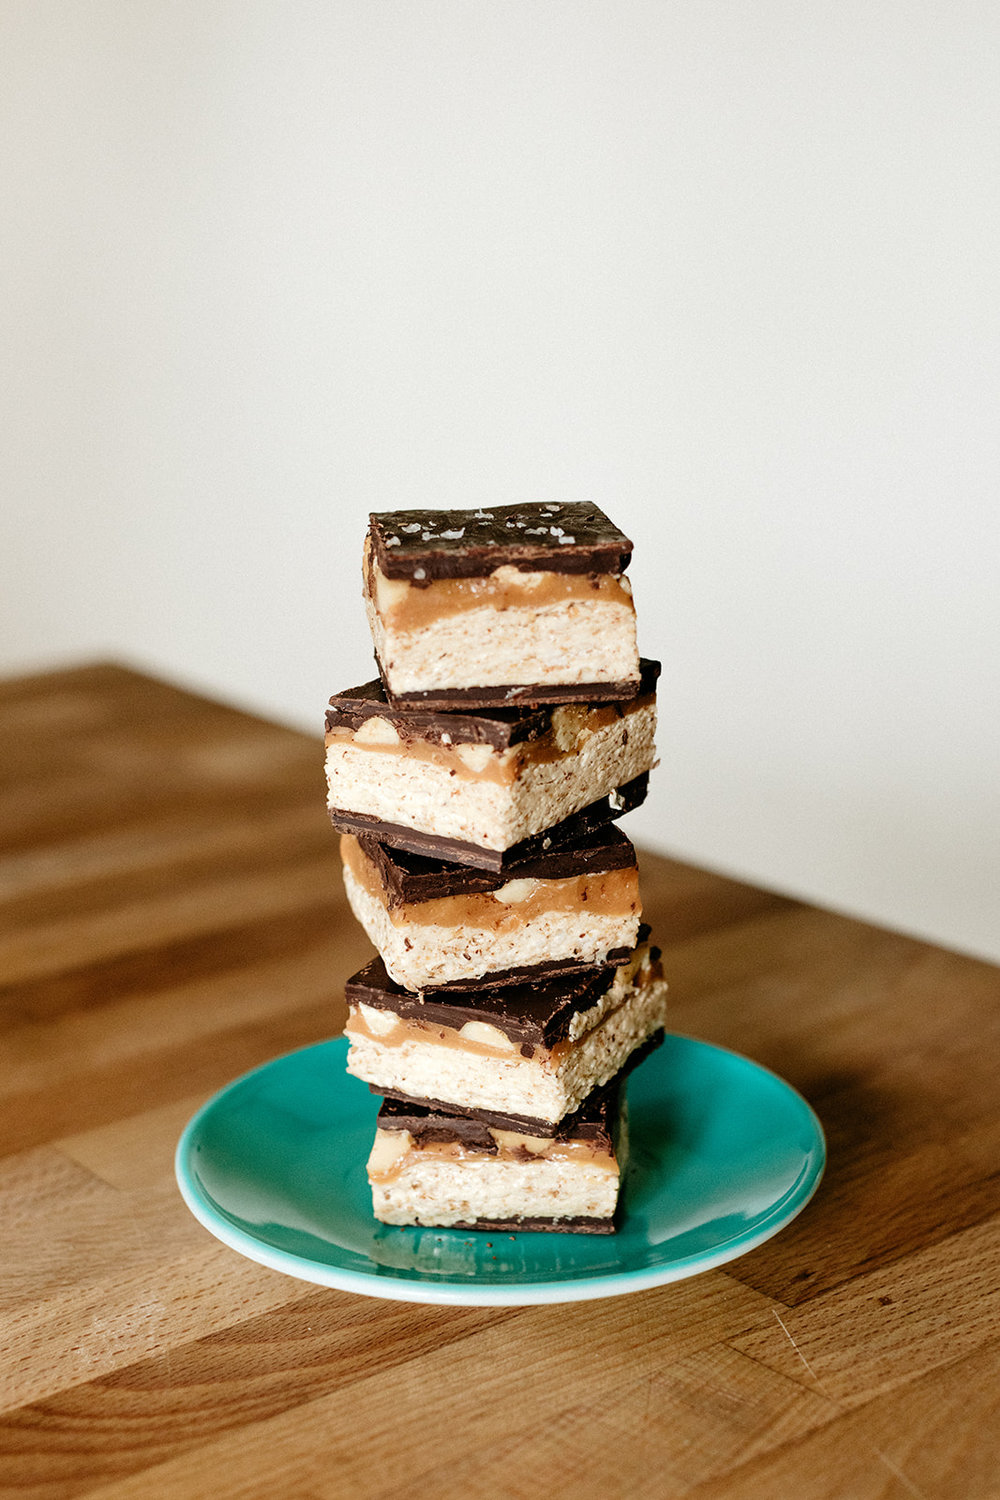 7-19-19-molly-yeh-homemade-snickers-12.jpg